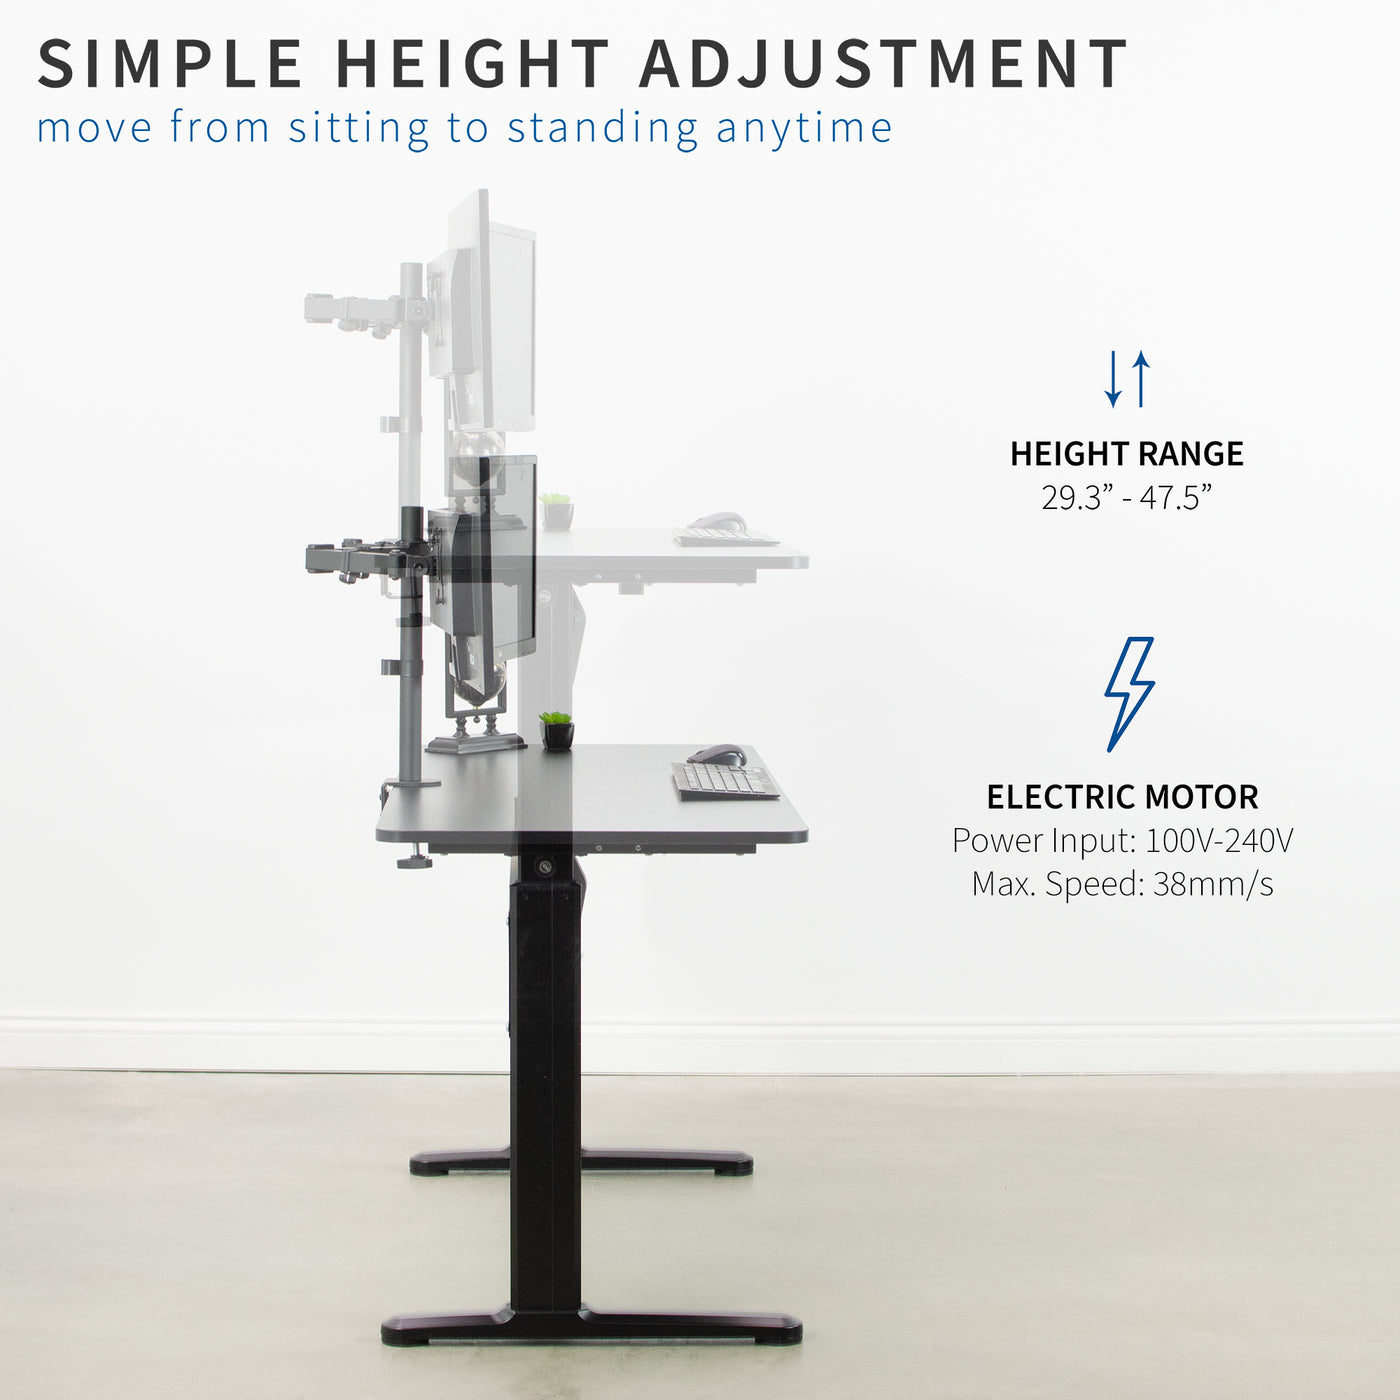 Height adjustments made simple at the press of a button to quickly move from sitting to standing.